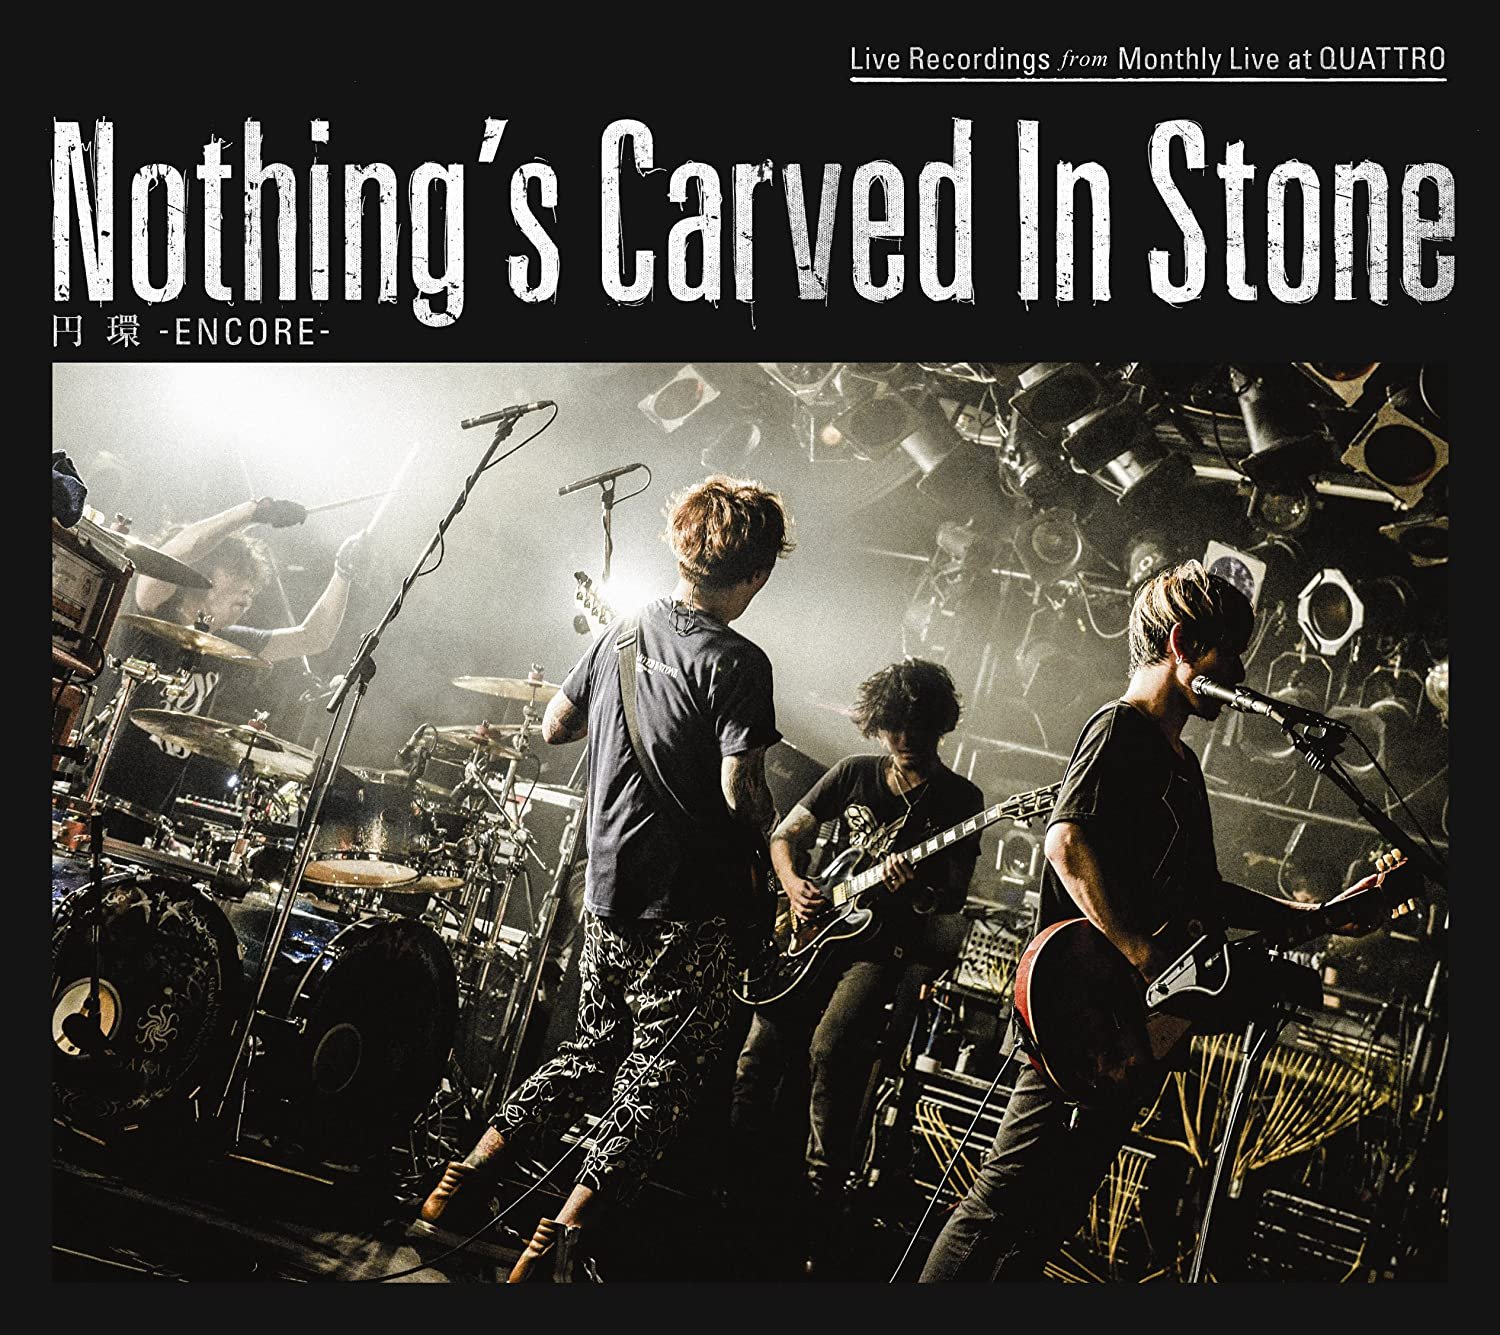 Carved in stone. Nothing's Carved in Stone. Out of Control nothing's Carved in Stone. Nothing's Carved in Stone「Wonderer」 обложка. Nothing's Carved in Stone Cover.